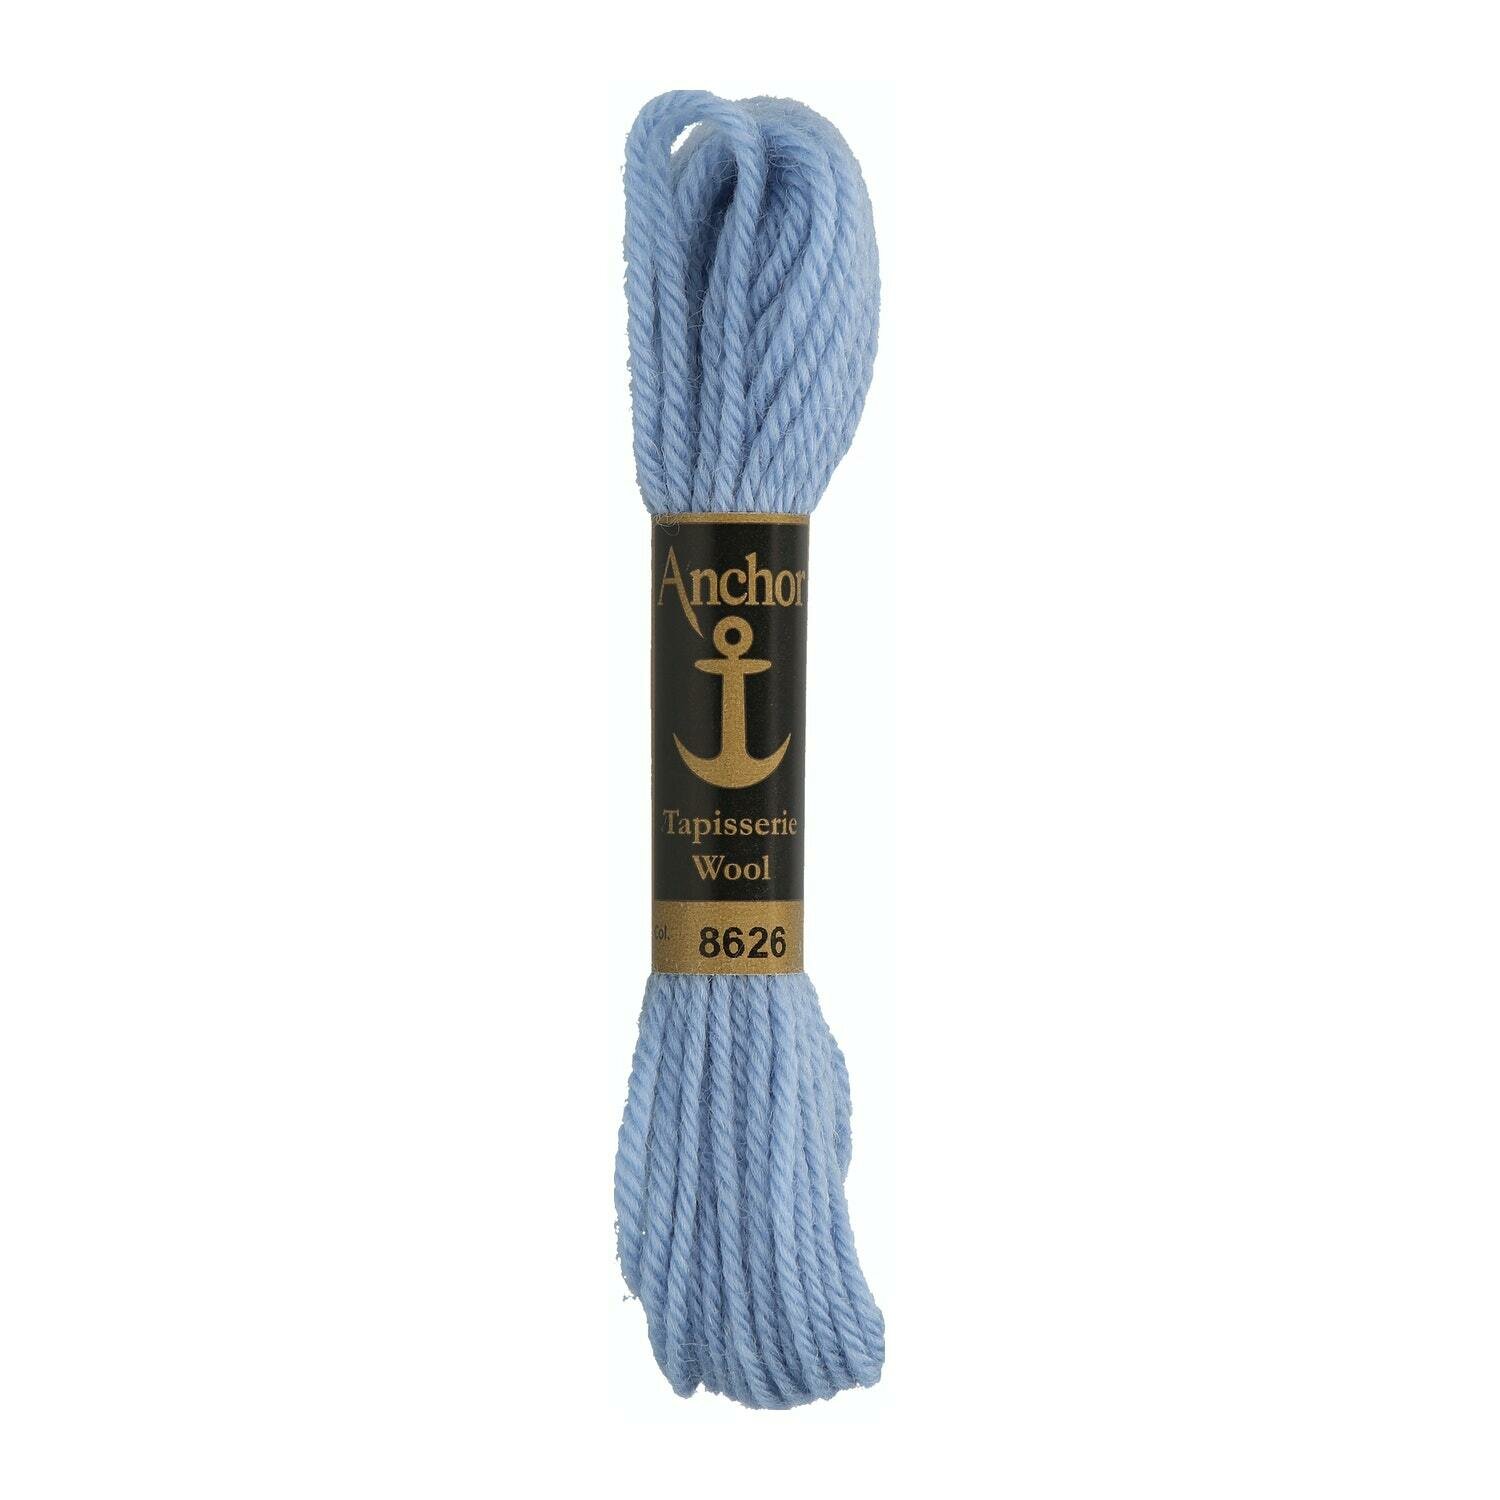 Anchor Tapisserie Wool # 08626